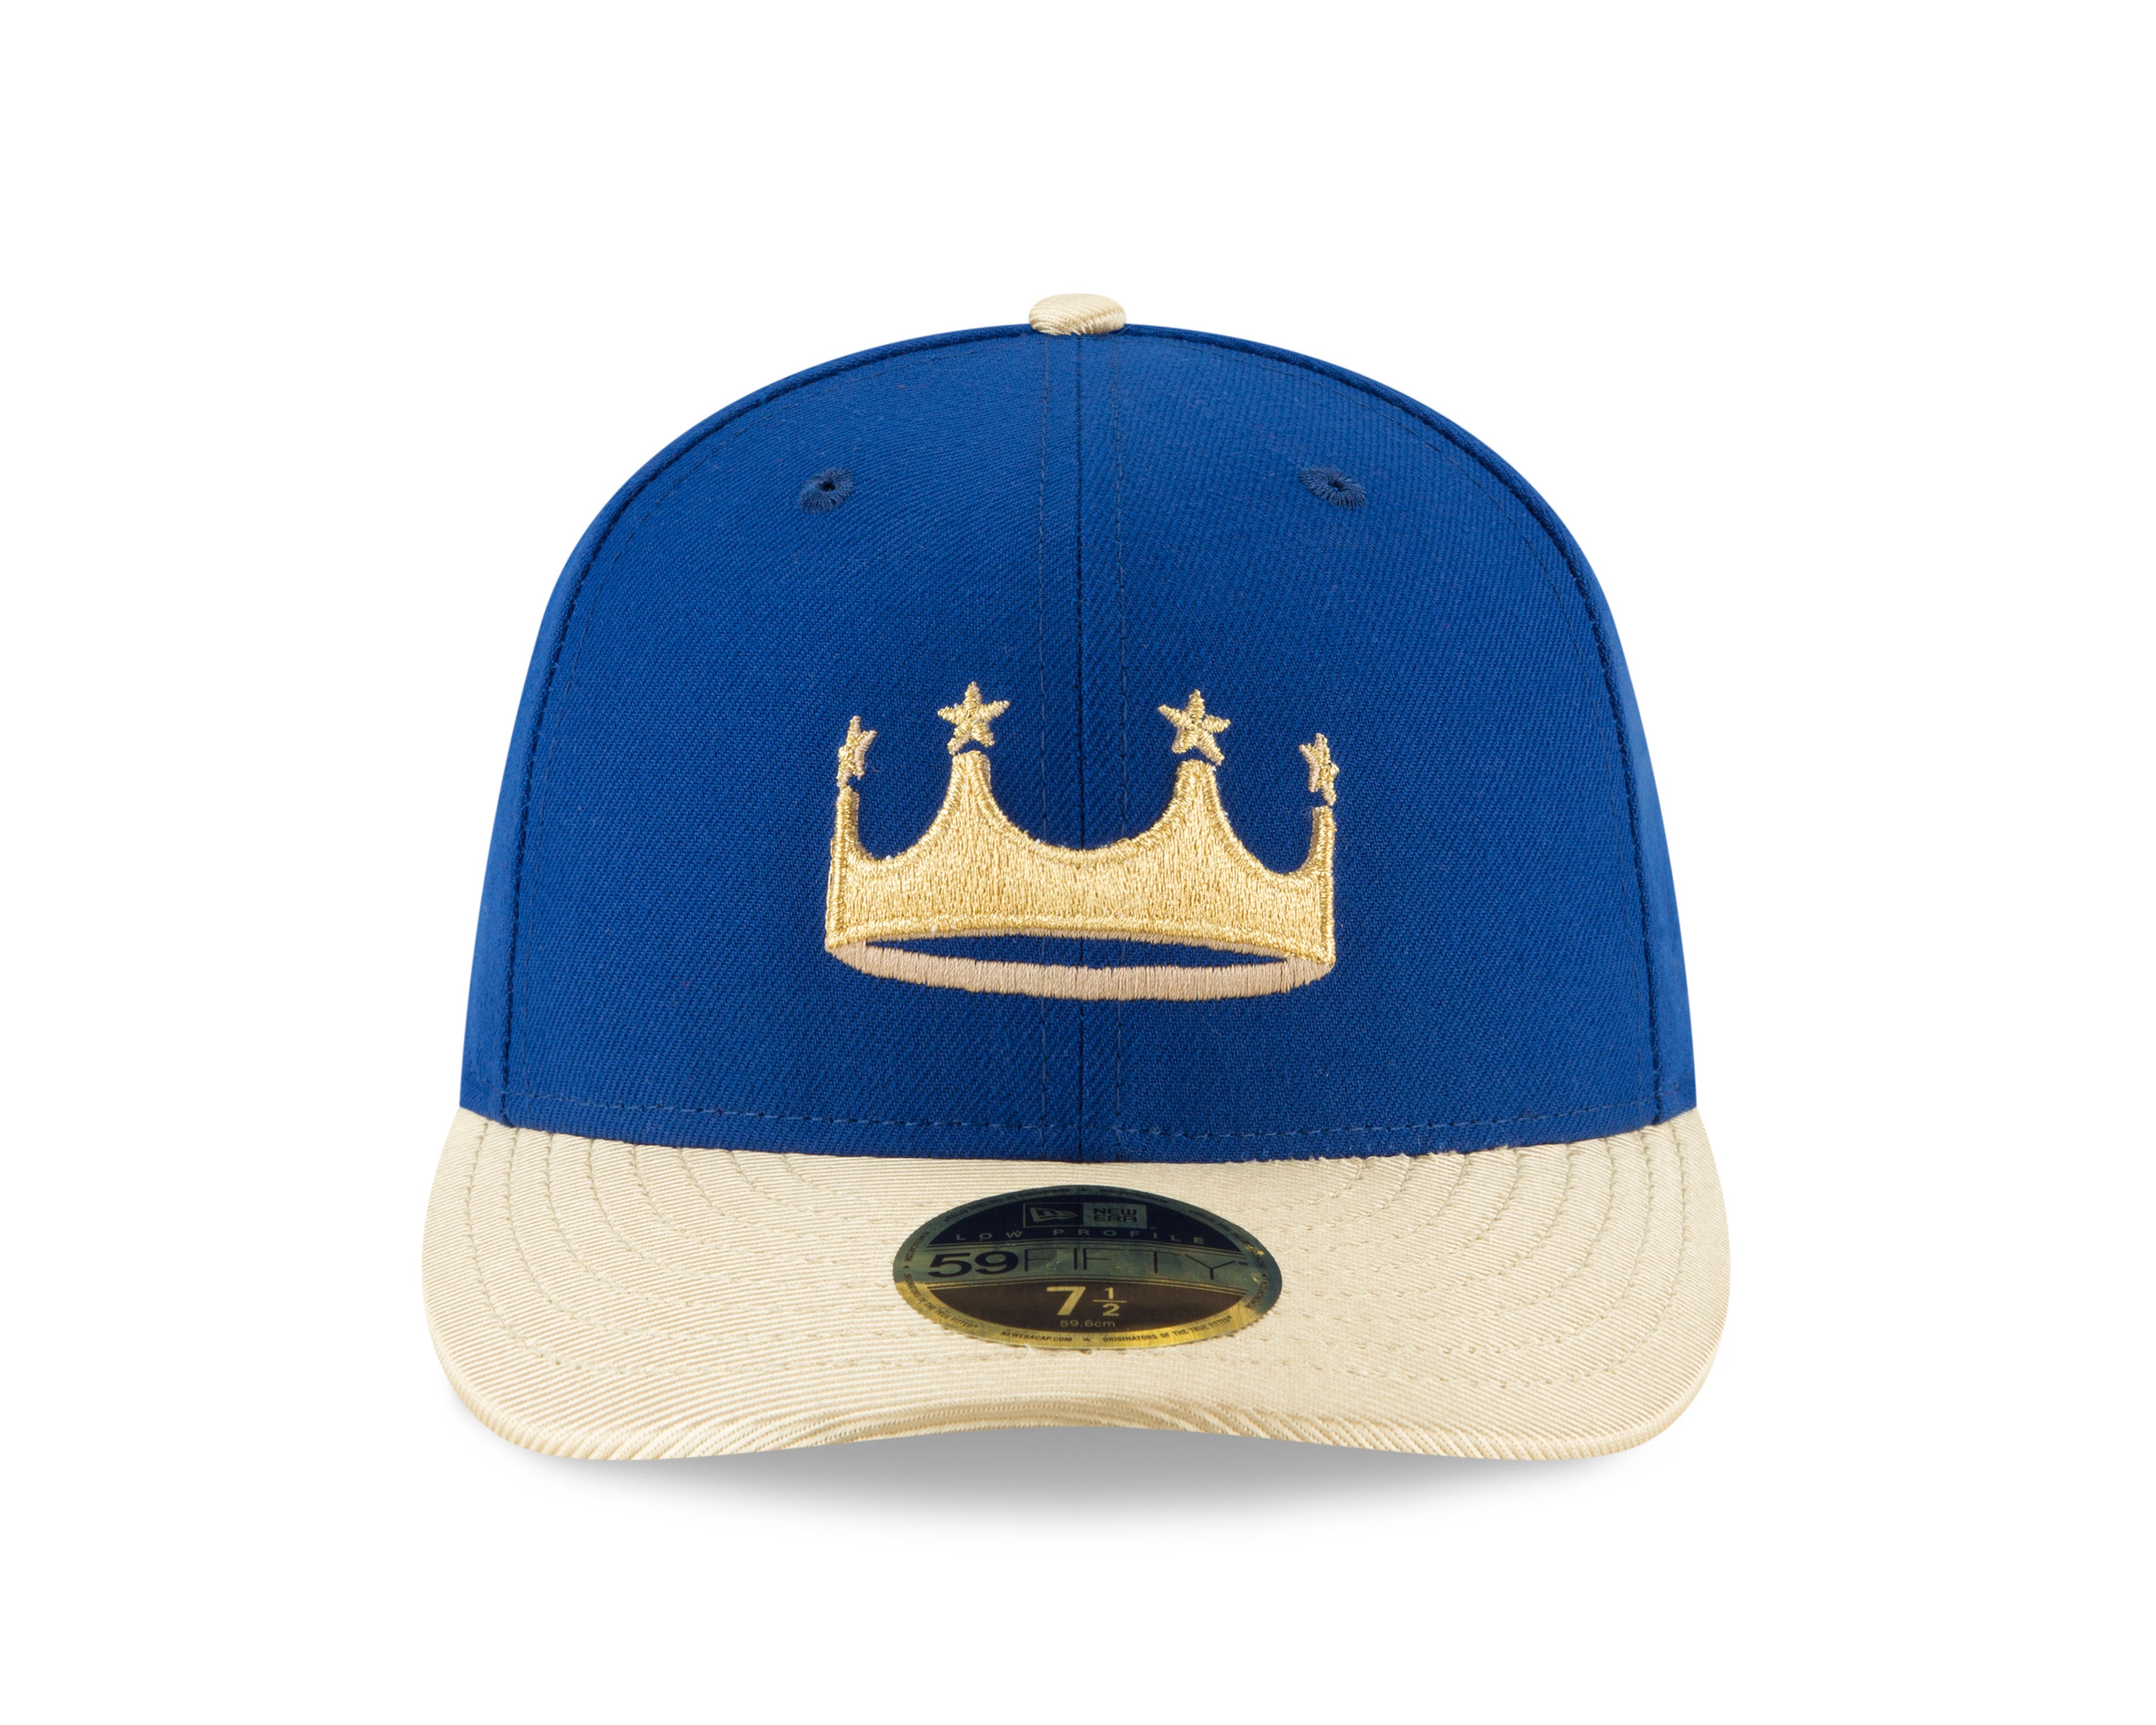 The Royals unveiled their new Turn Ahead the Clock uniforms, complete with  crown-style helmet